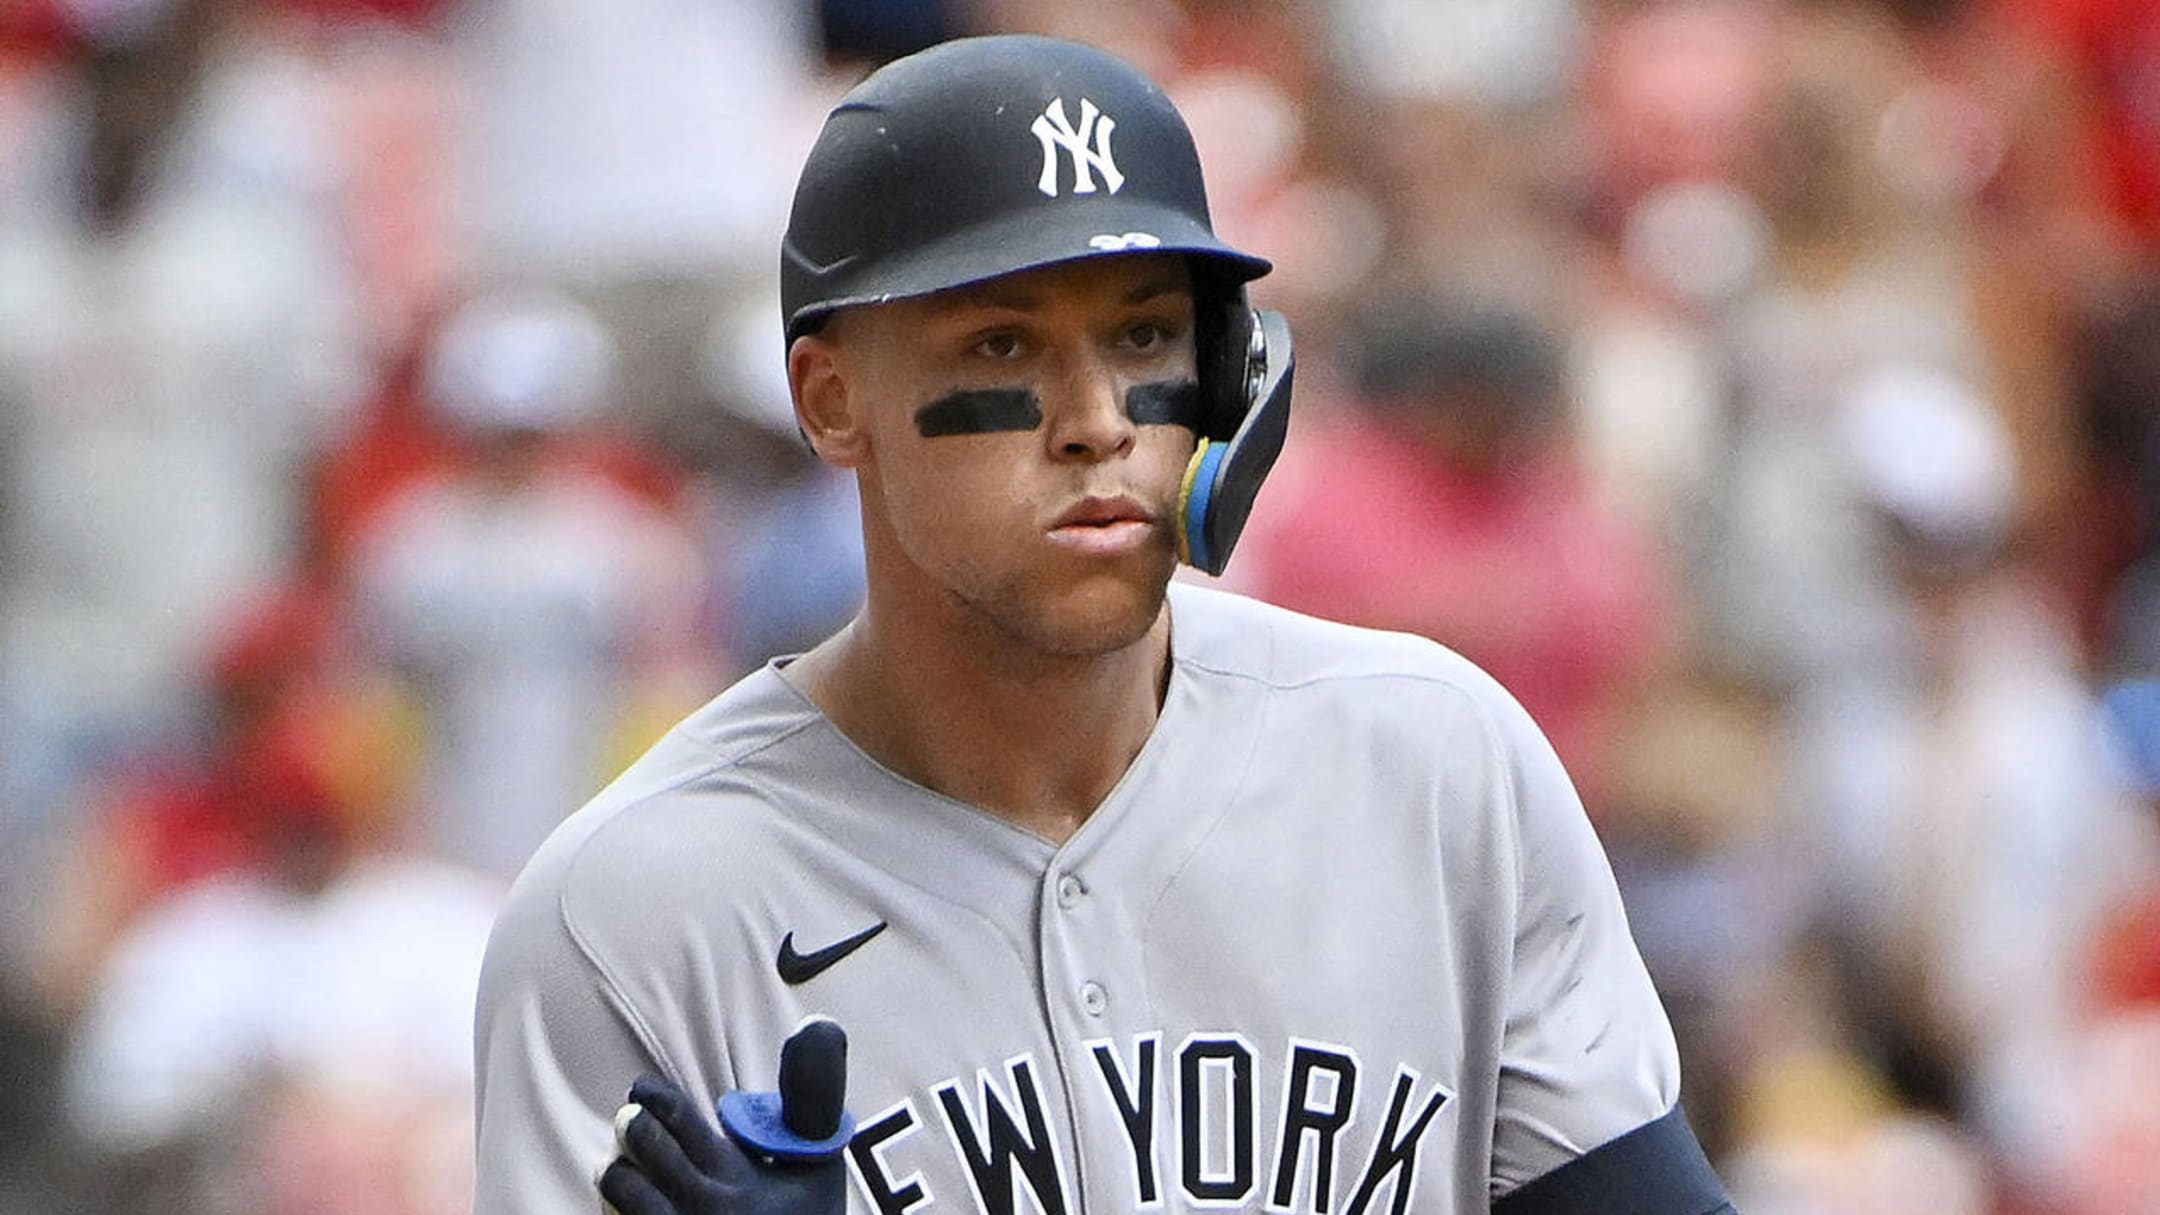 This season Aaron Judge broke Roger Maris' record and Yankees fans  hearts due to his nonexistent hitting in the ALCS